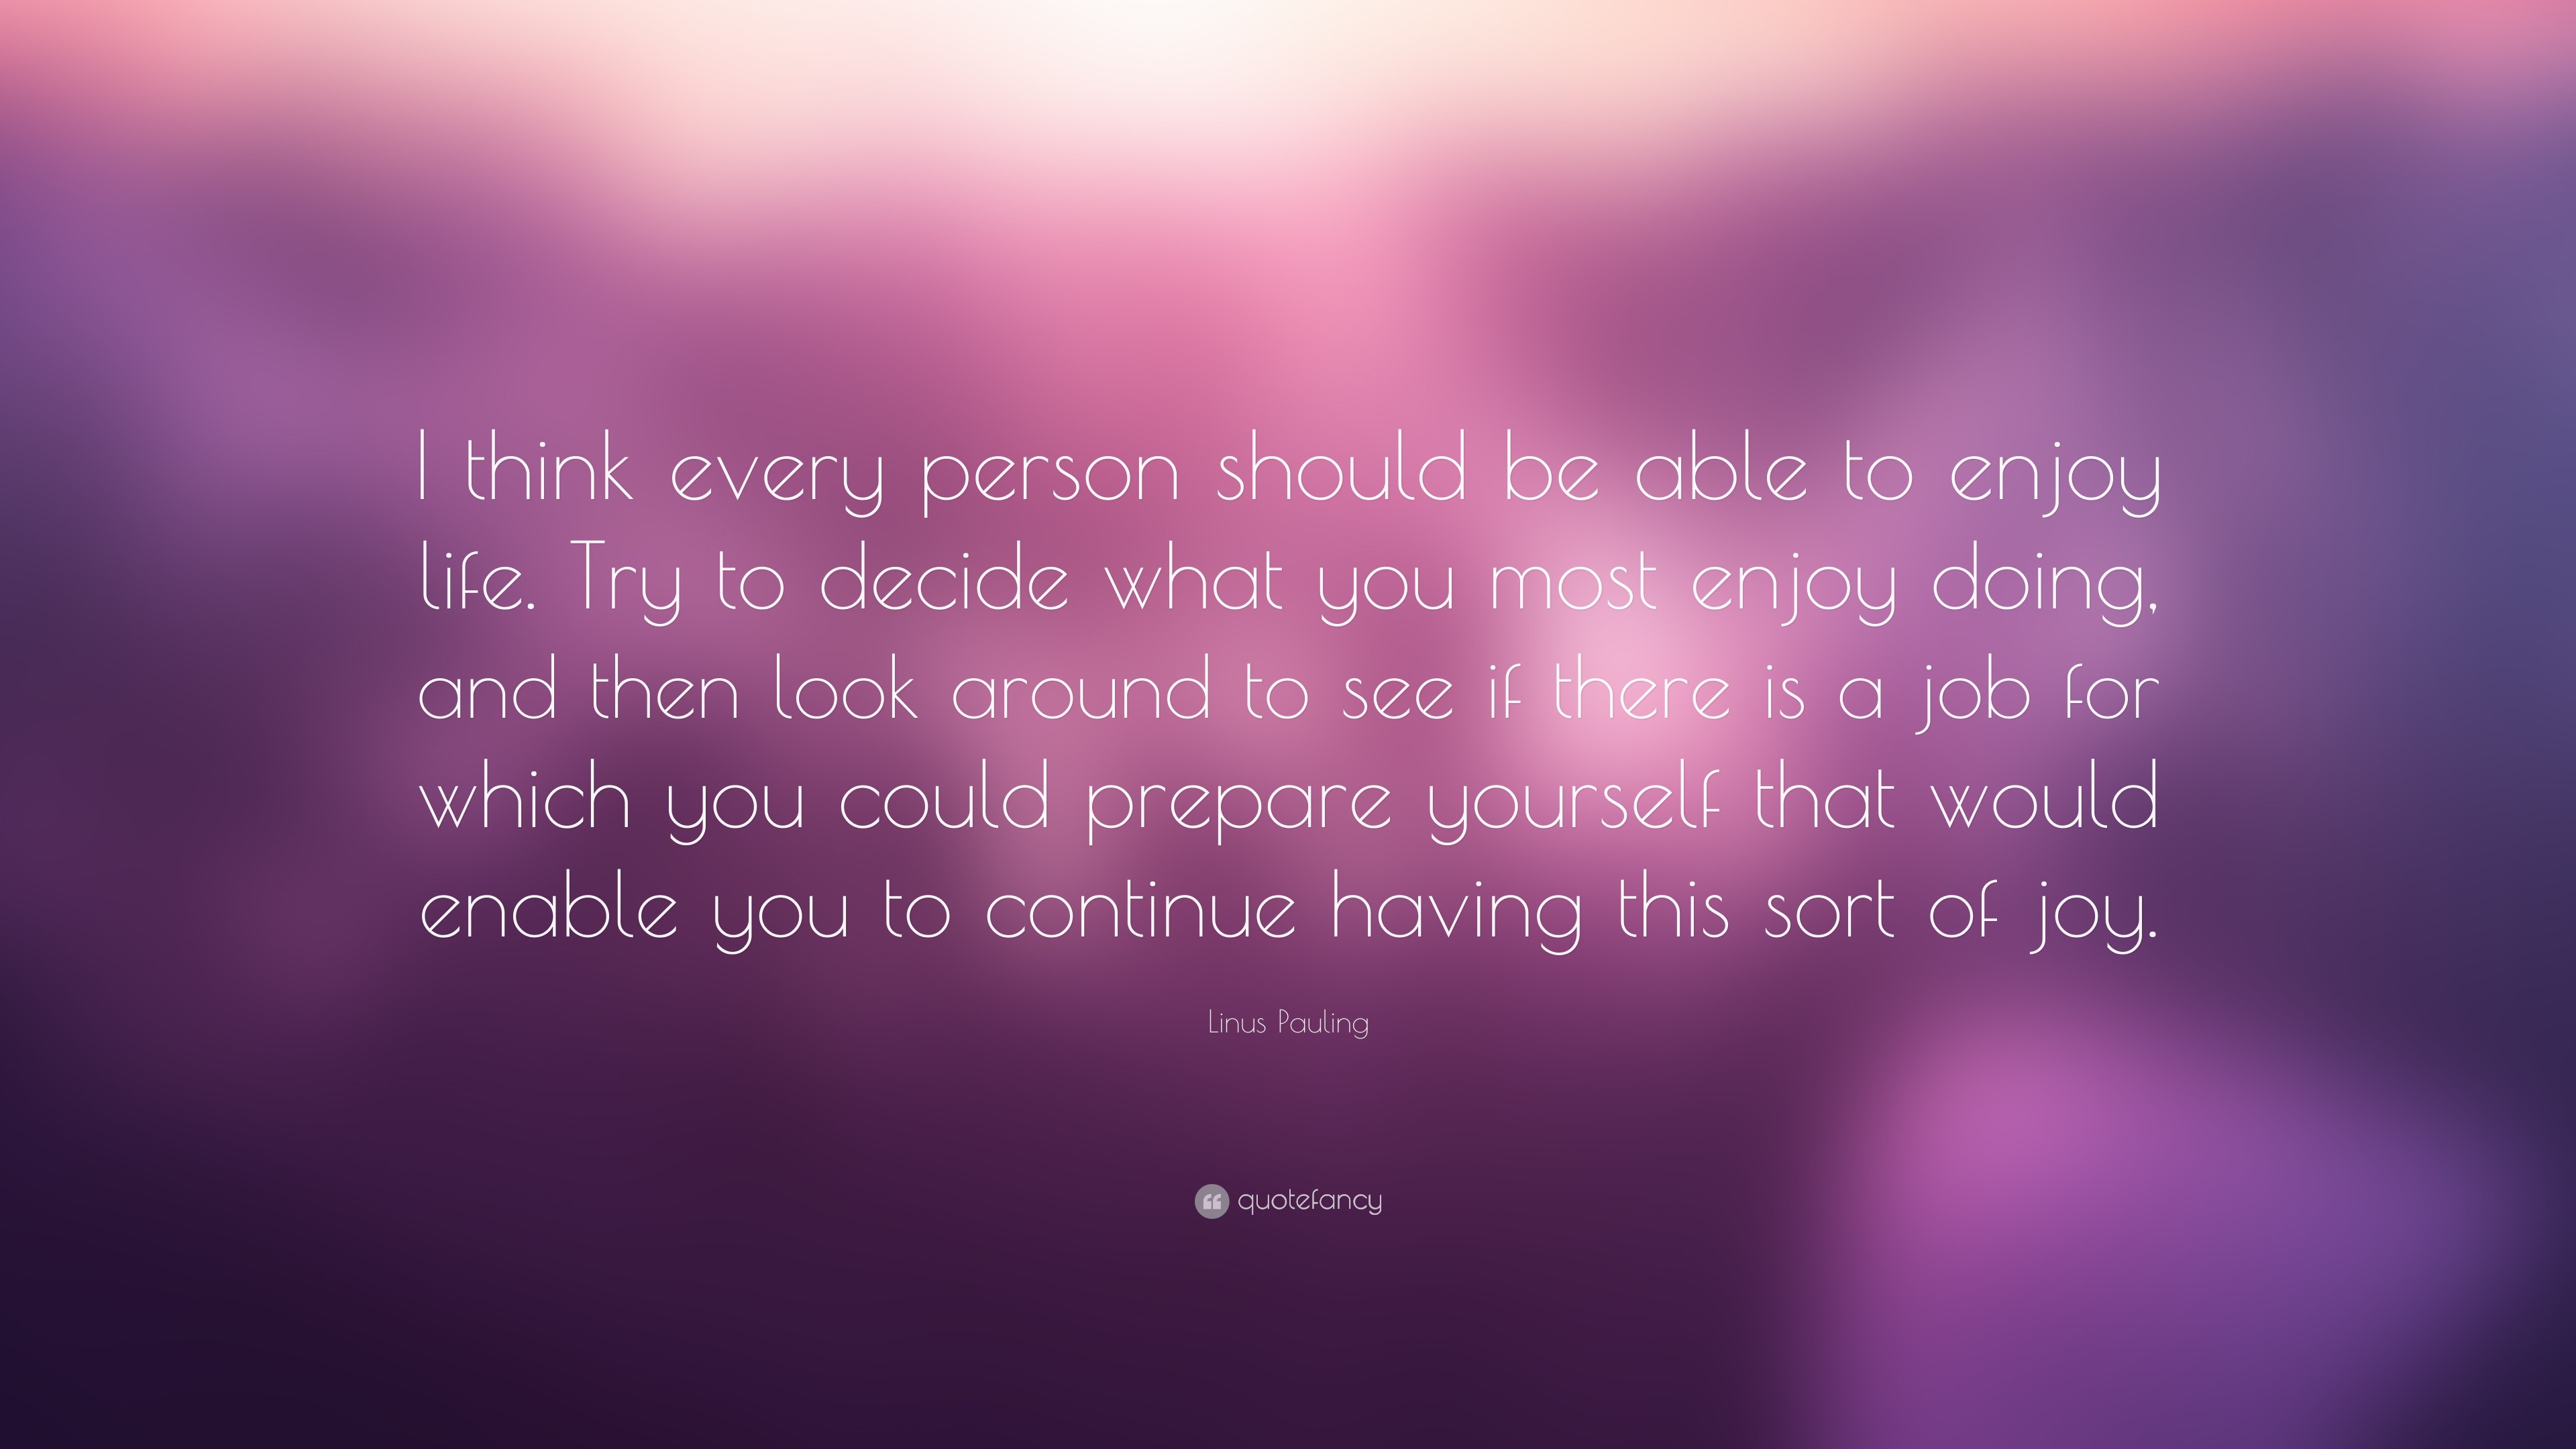 Linus Pauling Quote: “I think every person should be able to enjoy life ...